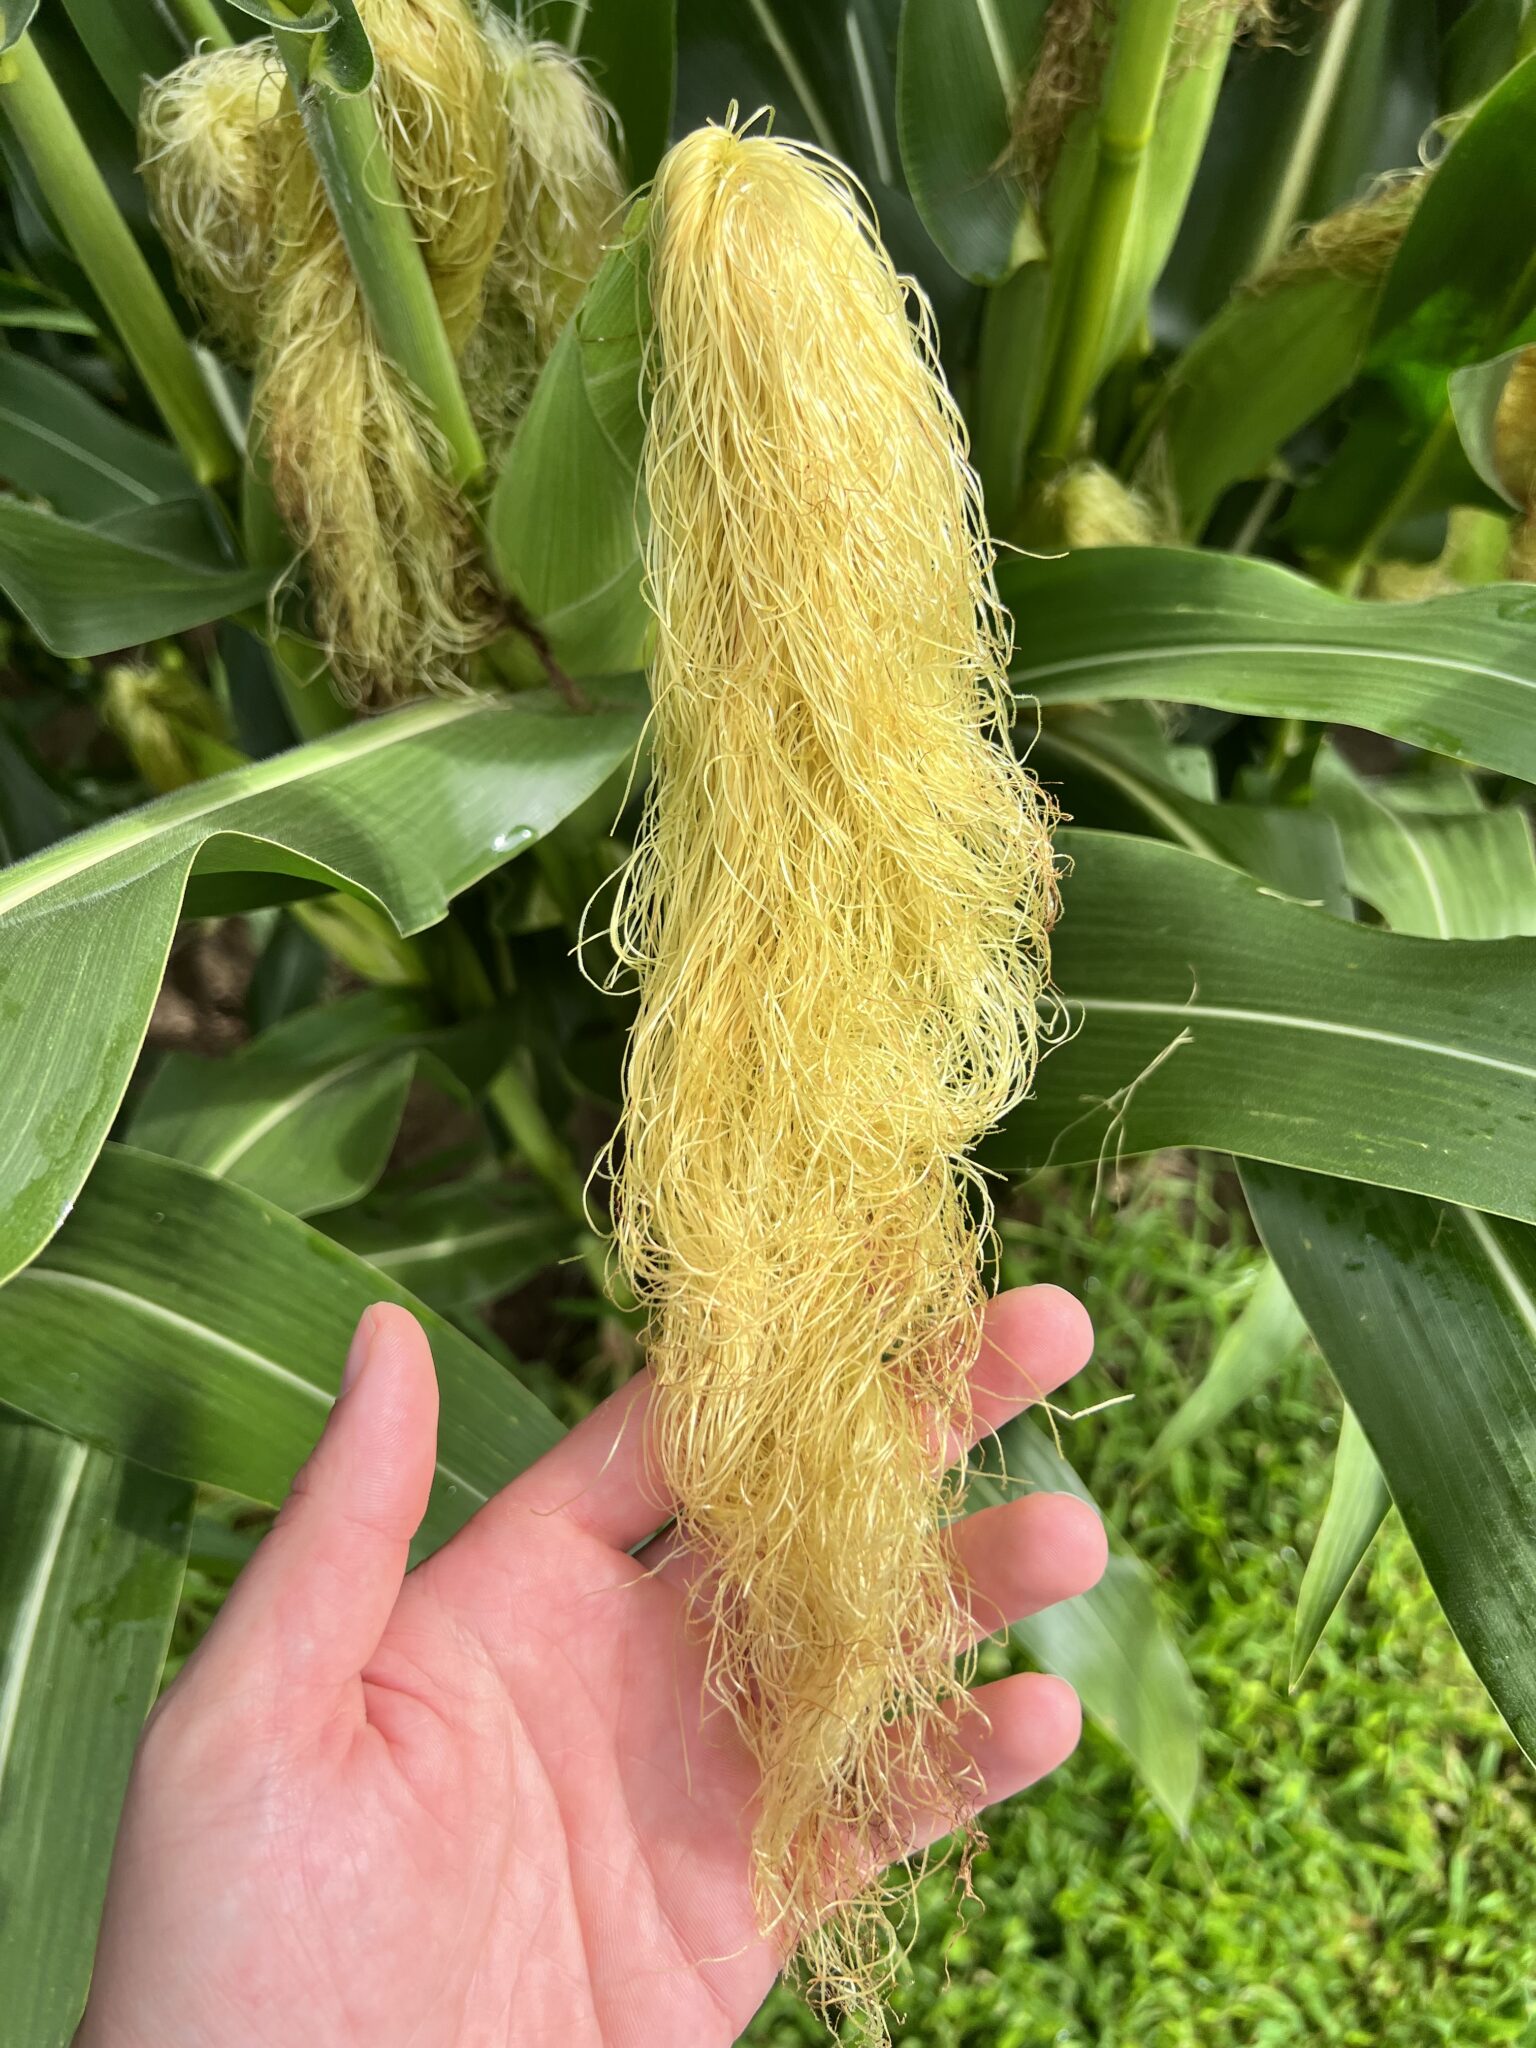 Figure 1. Excessive silk growth on corn ear due to lack of pollen availability in Central Indiana during the 2022 growing season. (Photo Credit: Dan Quinn)